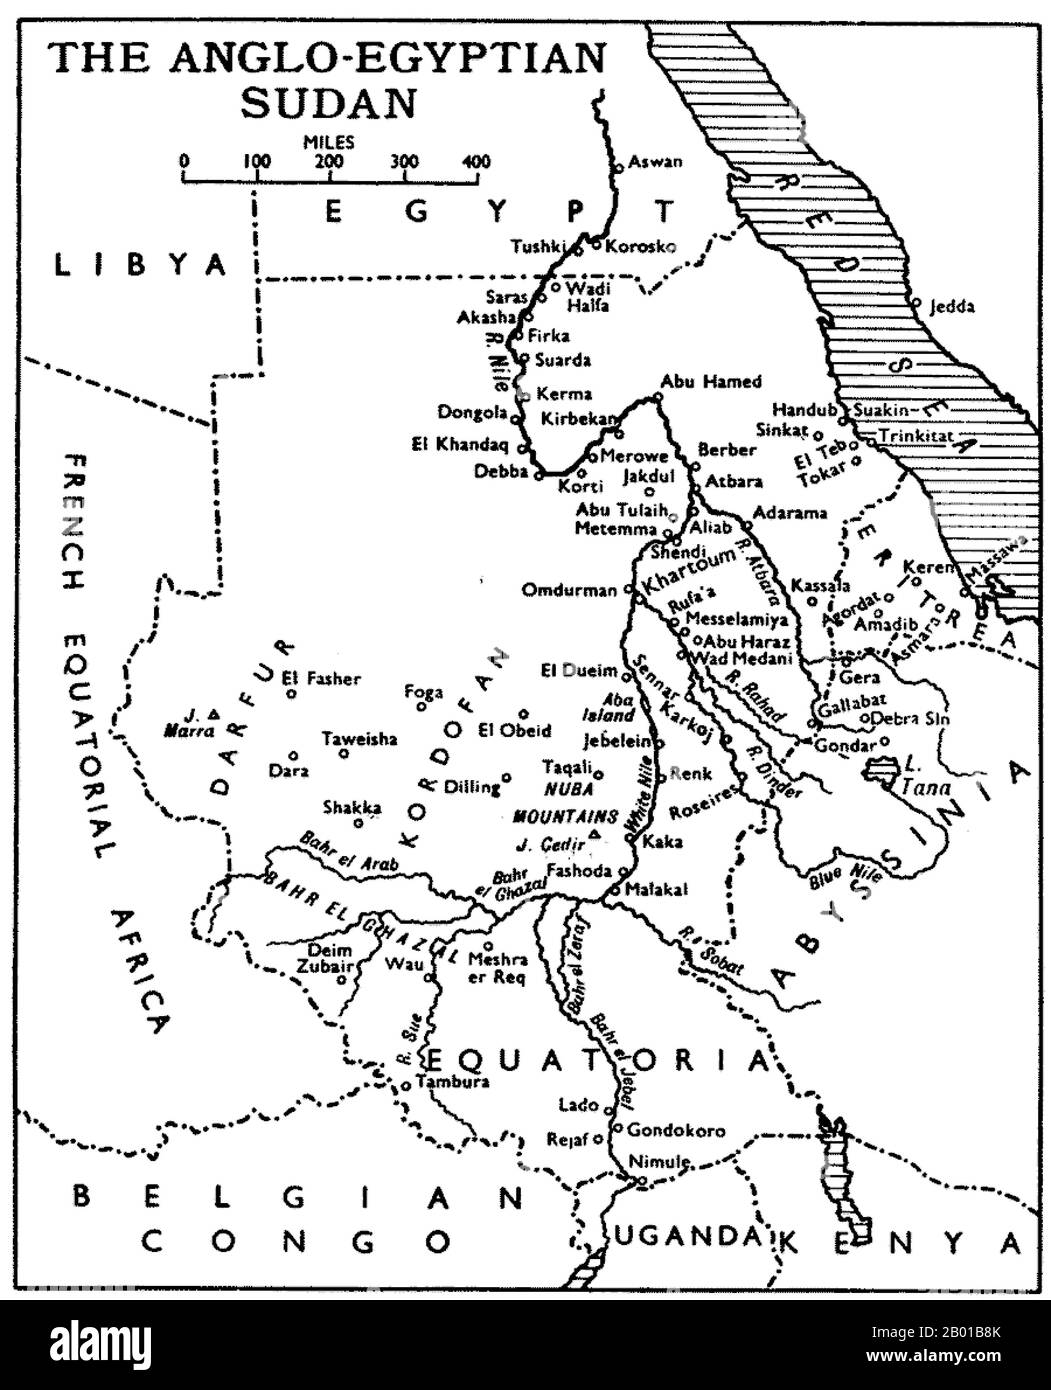 Sudan: Map of the Anglo-Egyptian Sudan showing Equatoria Province - now roughly coterminous with South Sudan, late 19th century.  The term Anglo-Egyptian Sudan refers to the period between 1891 and 1956 when Sudan was administered as a condominium of Egypt and the United Kingdom. Sudan (comprising modern-day Sudan and South Sudan) was de jure shared legally between Egypt and the British Empire, but was de facto controlled by the latter, with Egypt only enjoying limited local power in reality as Egypt itself fell under increasing British influence. Stock Photo